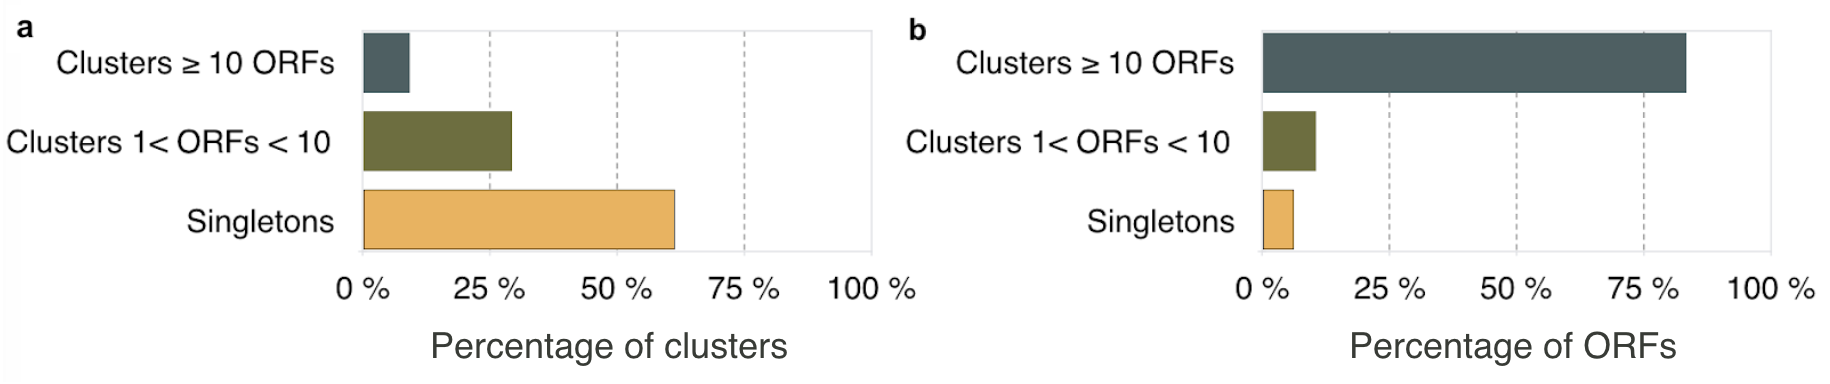 MG_mmseqs_clustering_res.png